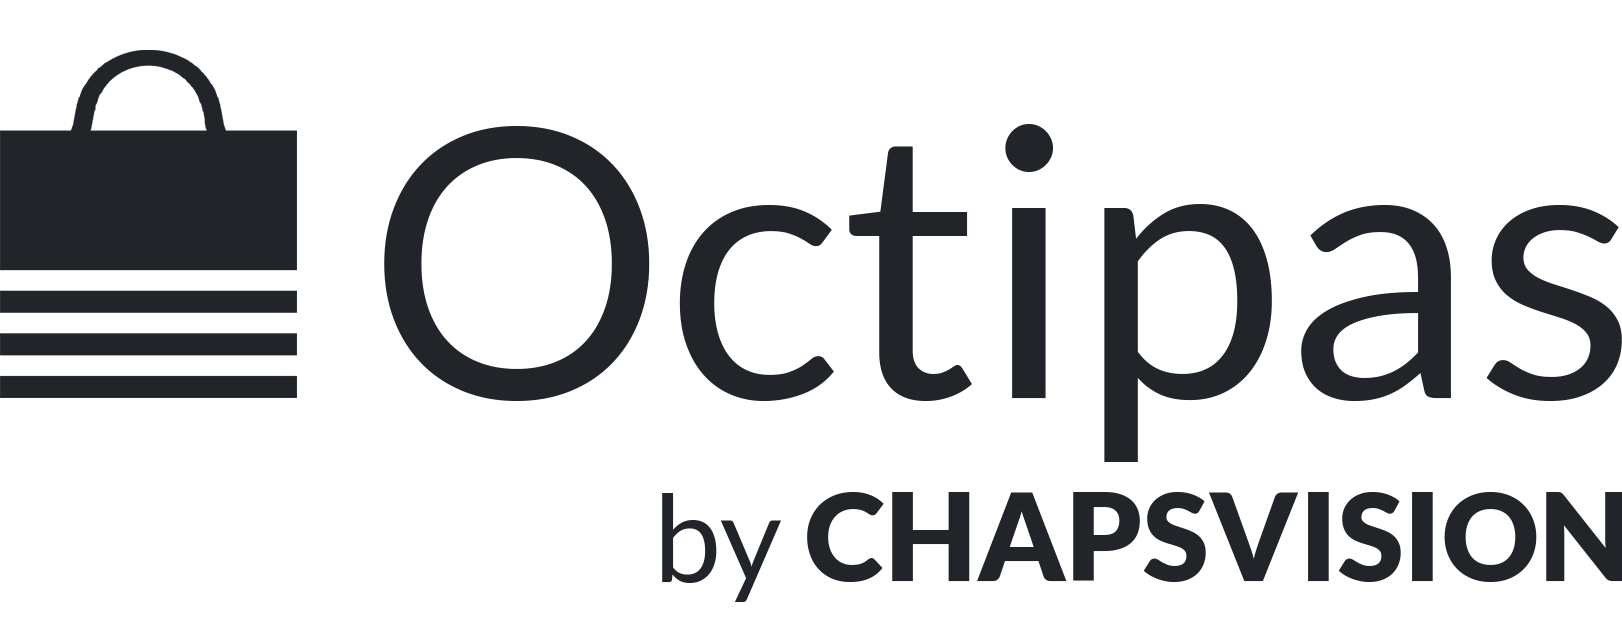 Octipas by ChapsVision